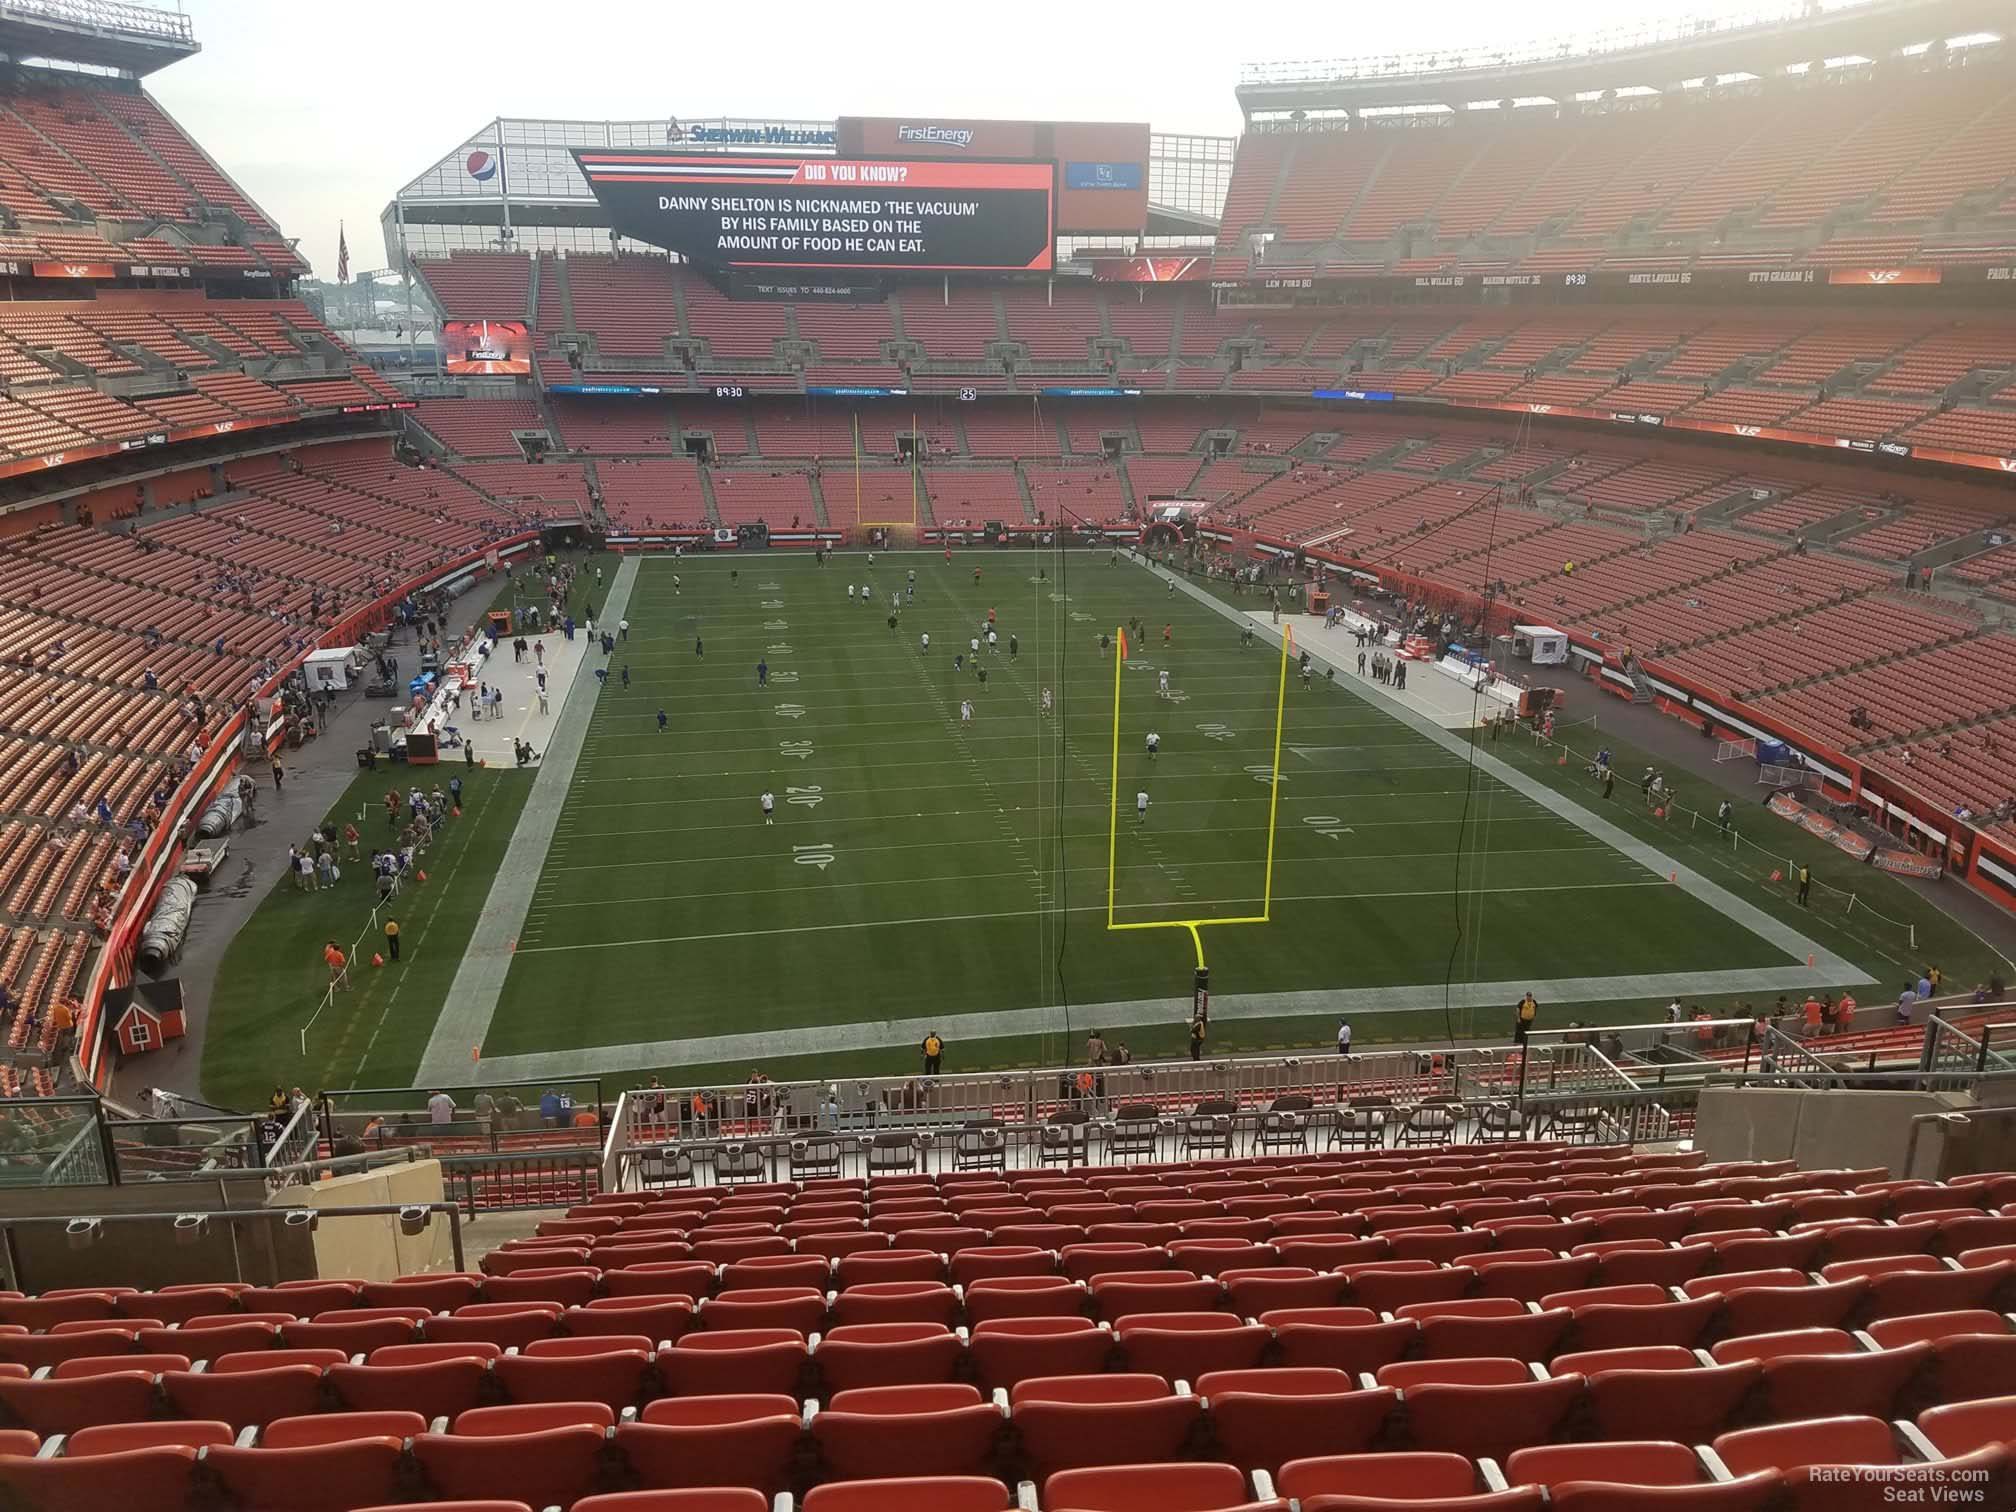 section 319, row 20 seat view  - cleveland browns stadium